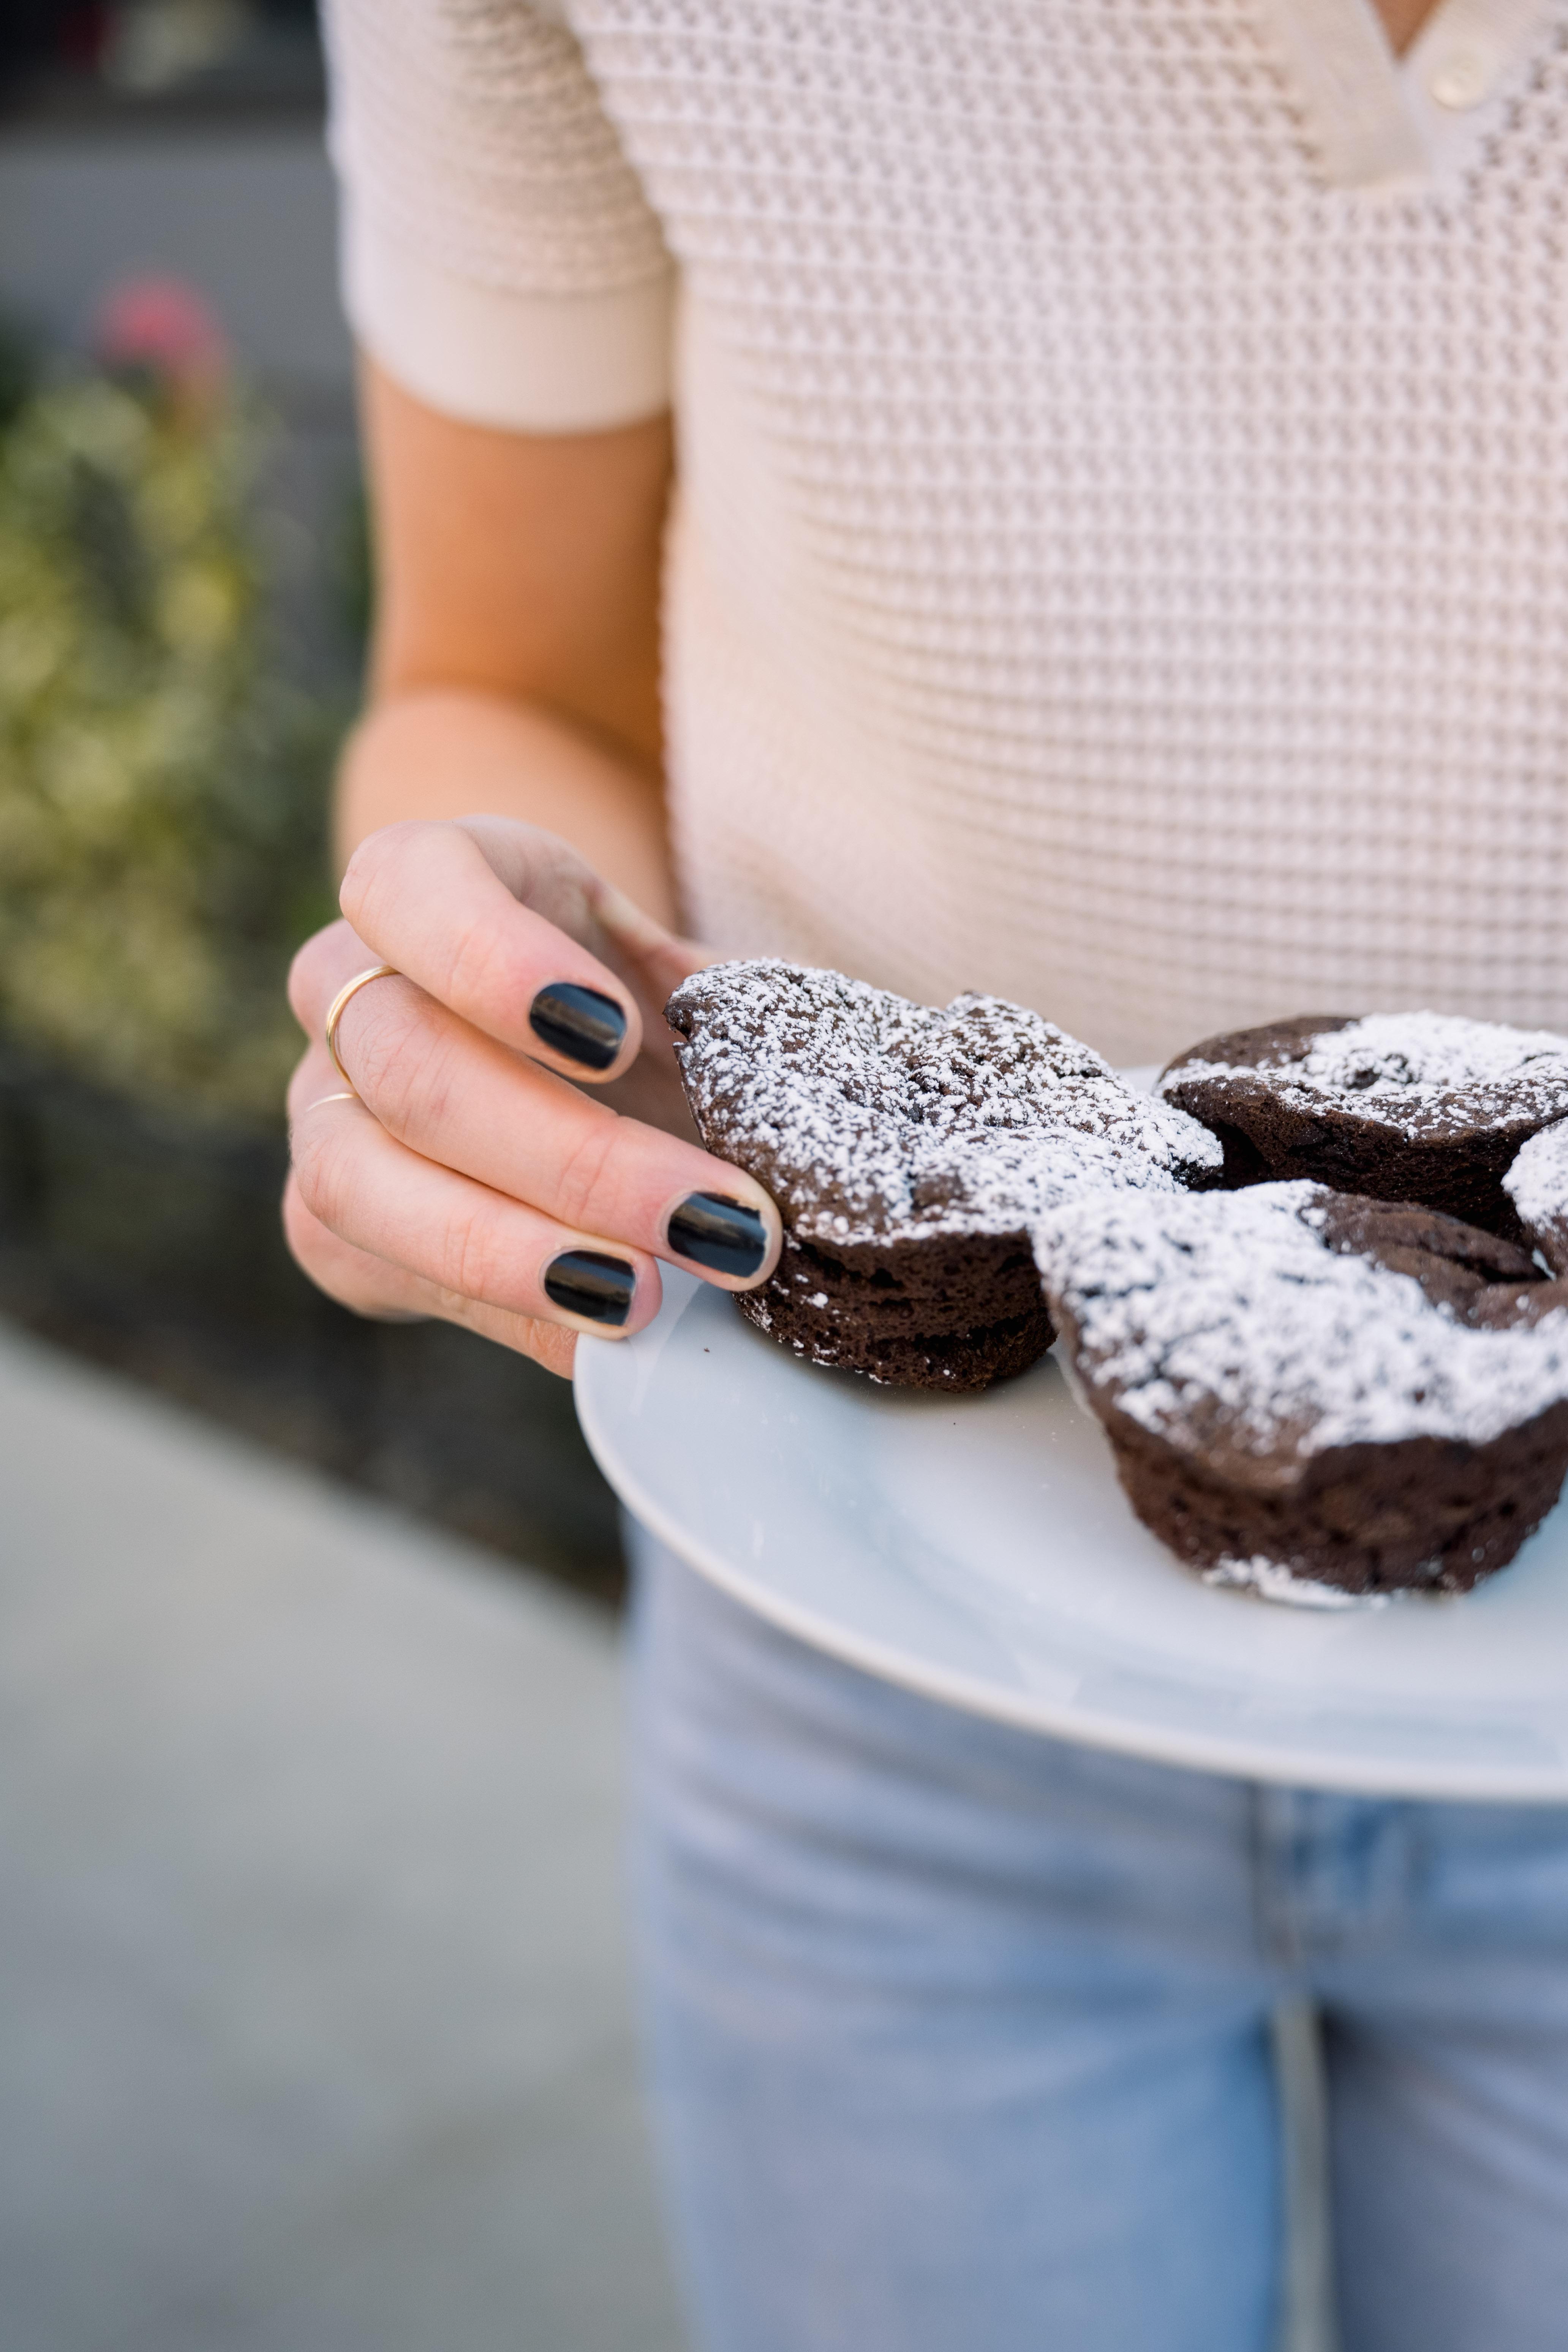 A person holding a plate of chocolate brownie cupcakes with powdered sugar on top.